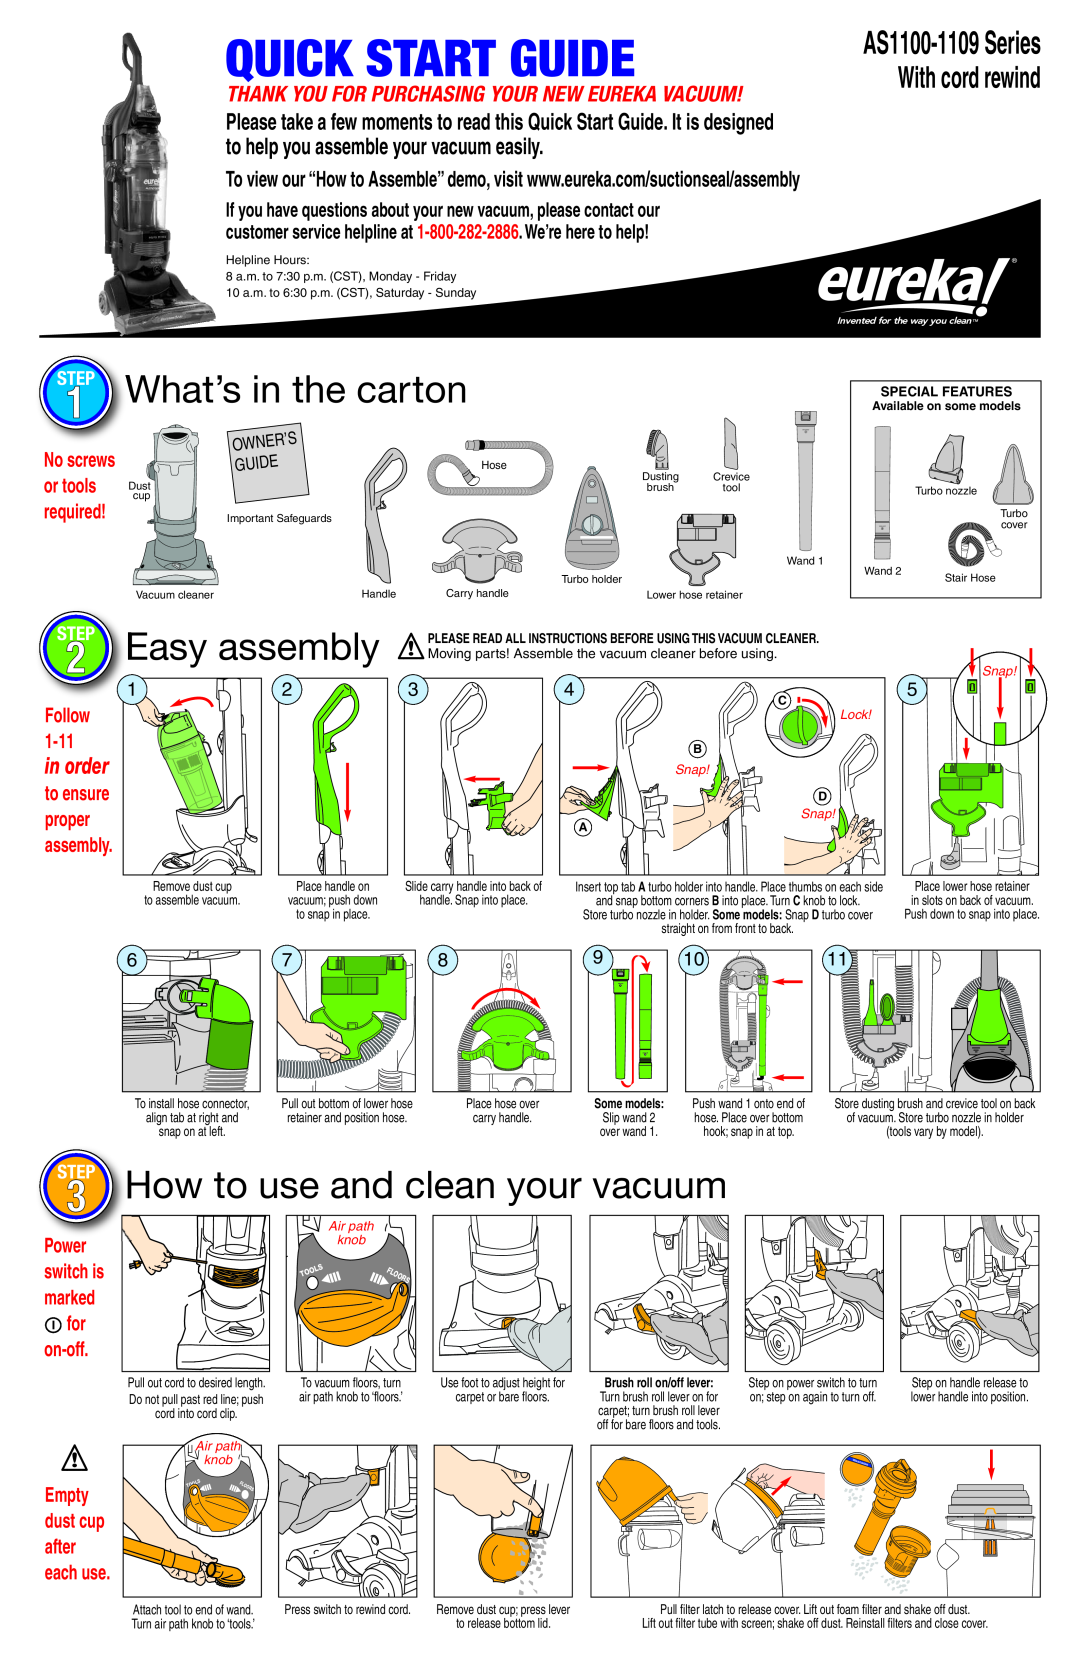 Eureka AS1100-1109 quick start Quick Start Guide, Easy assembly, How to use and clean your vacuum, What’s in the carton 